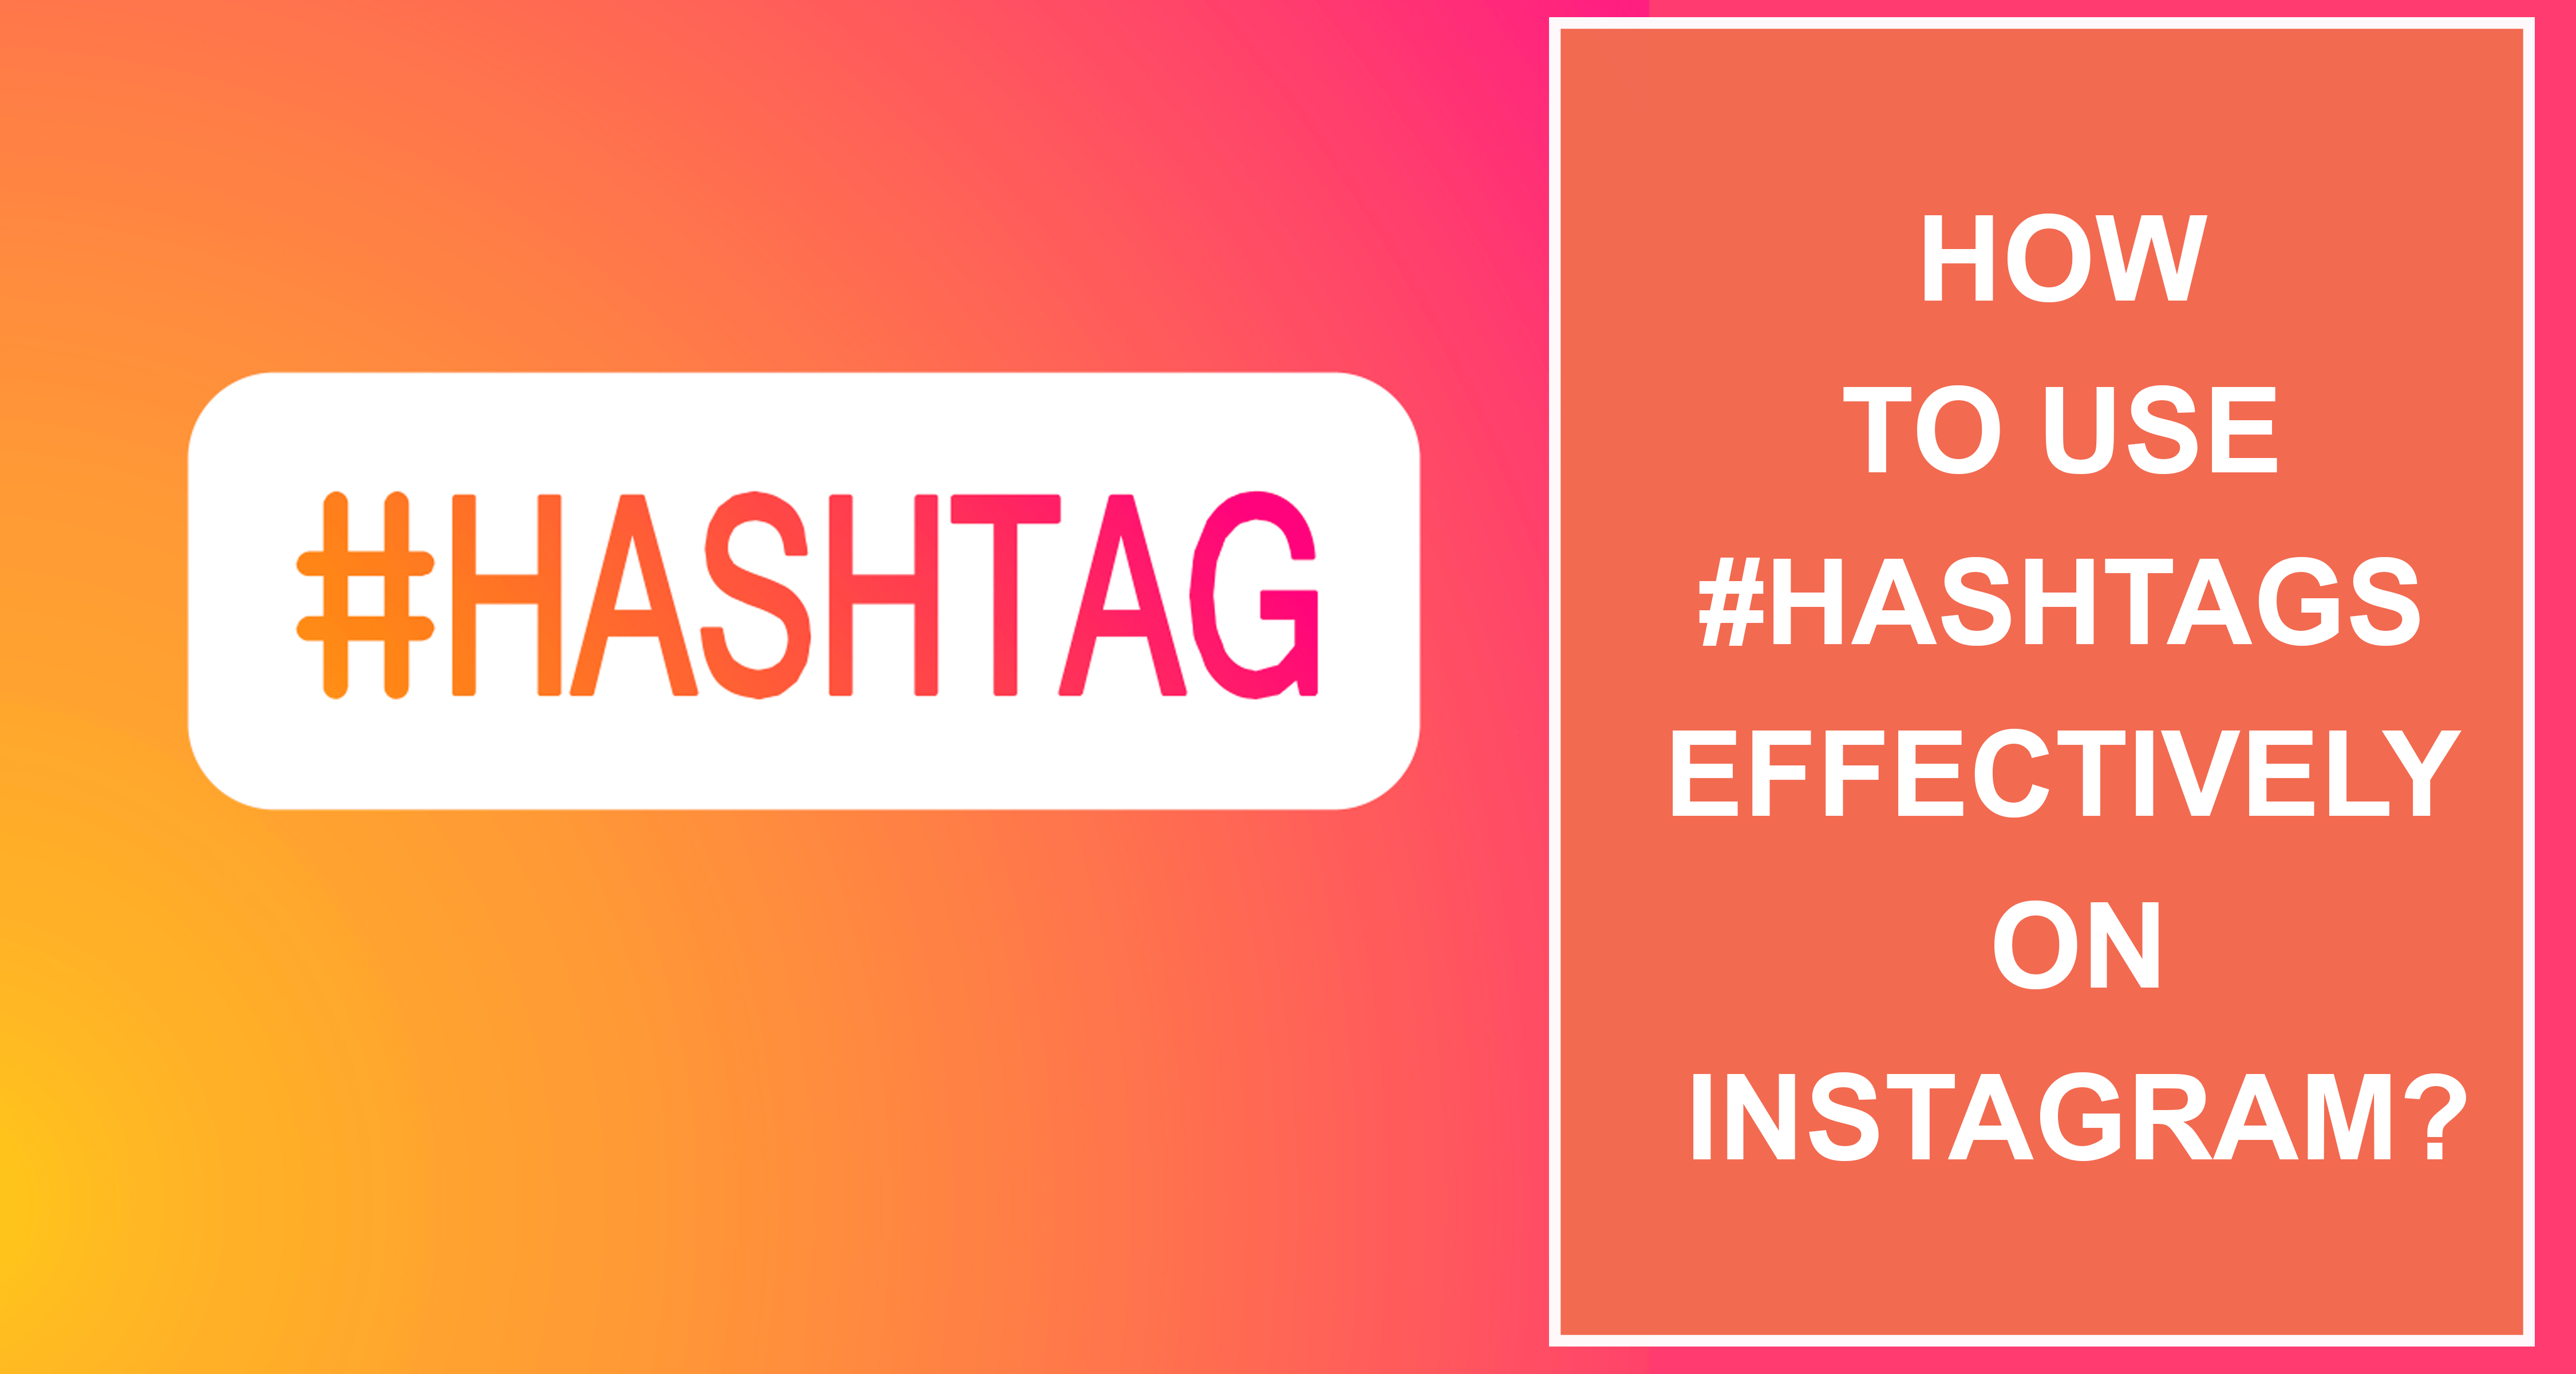 How To Use Hashtags Effectively To Get More Views On Instagram